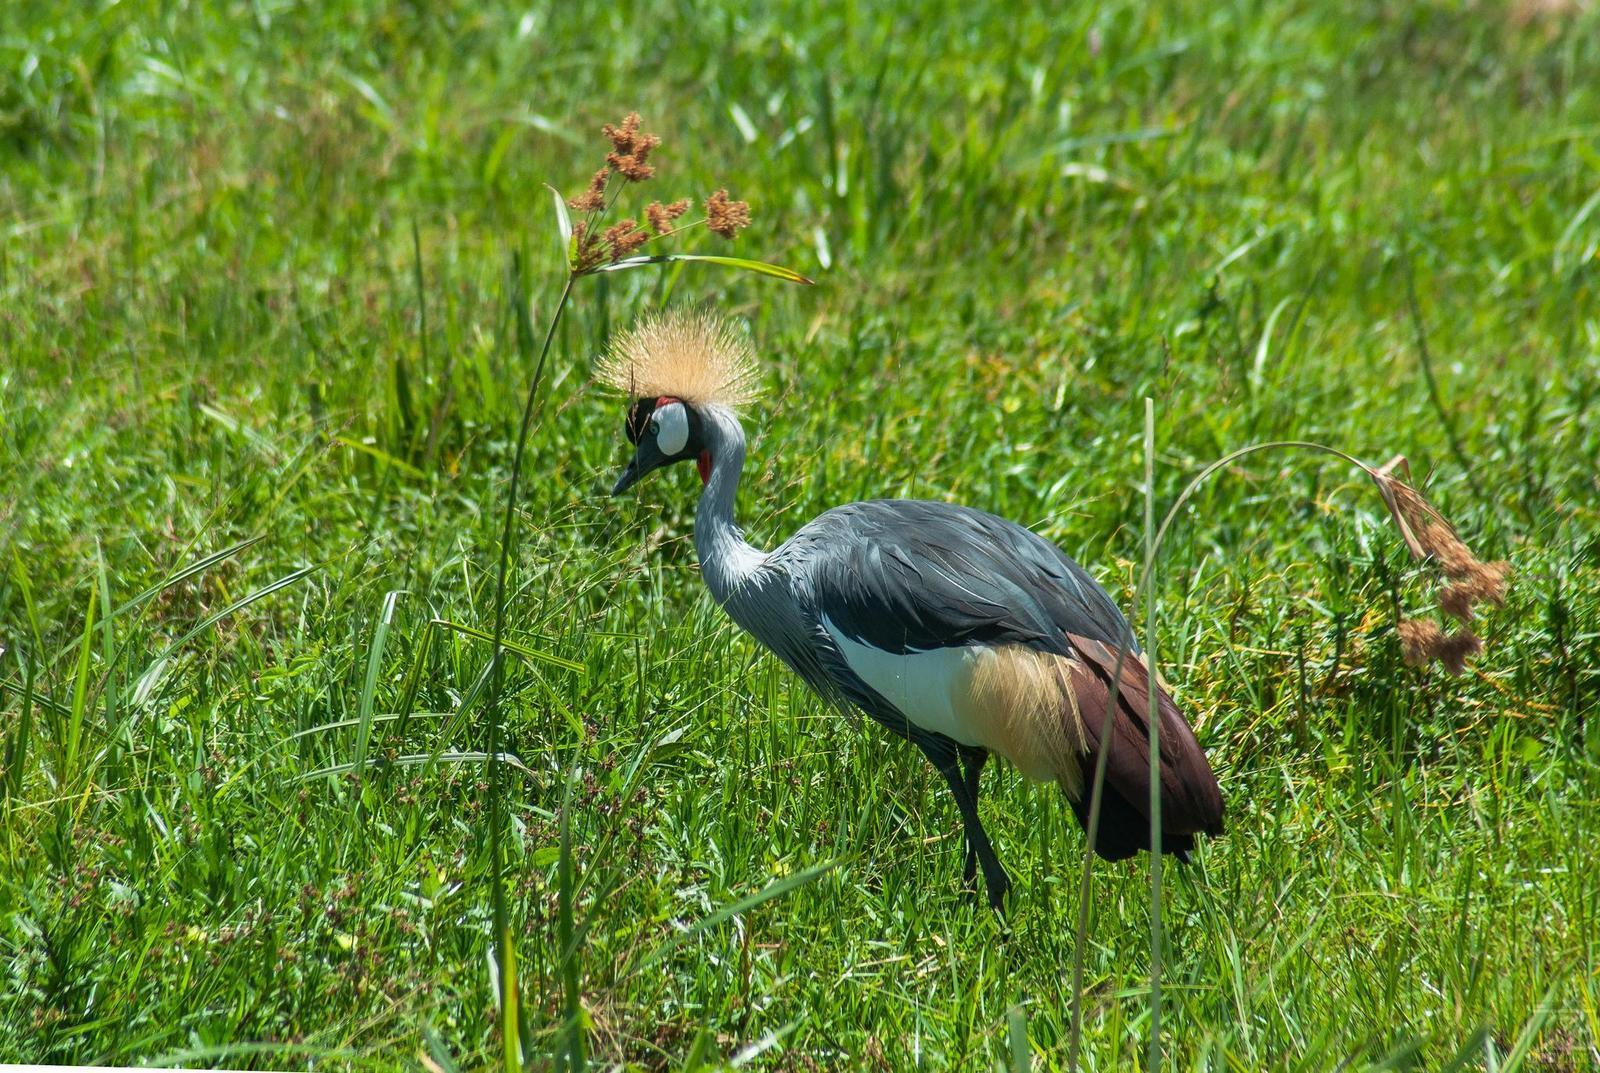 Gray Crowned-Crane Photo by Christy Turner